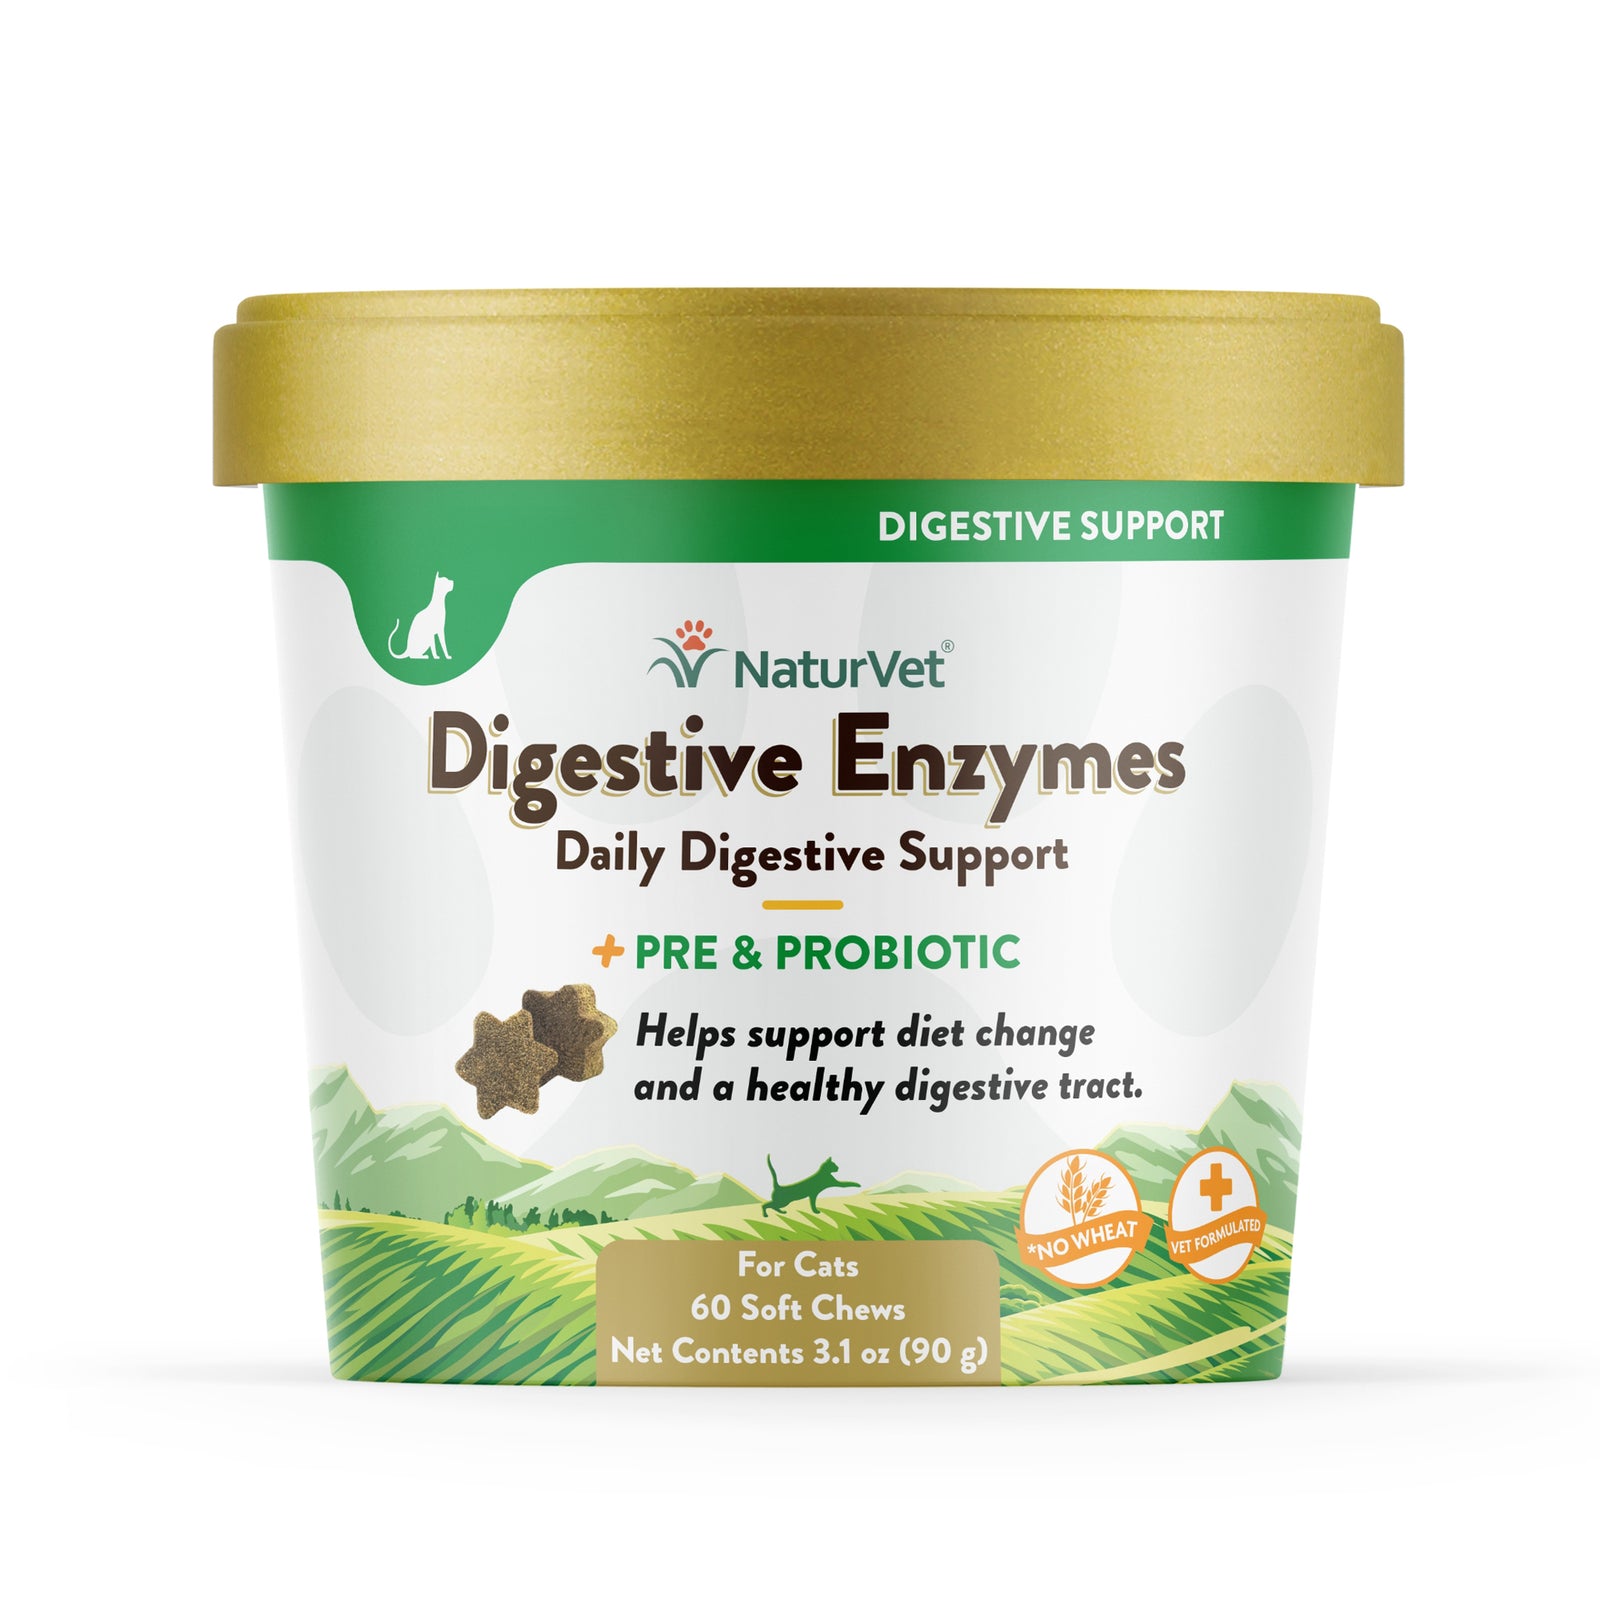 NaturVet Digestive Enzymes for Cats 60-ct